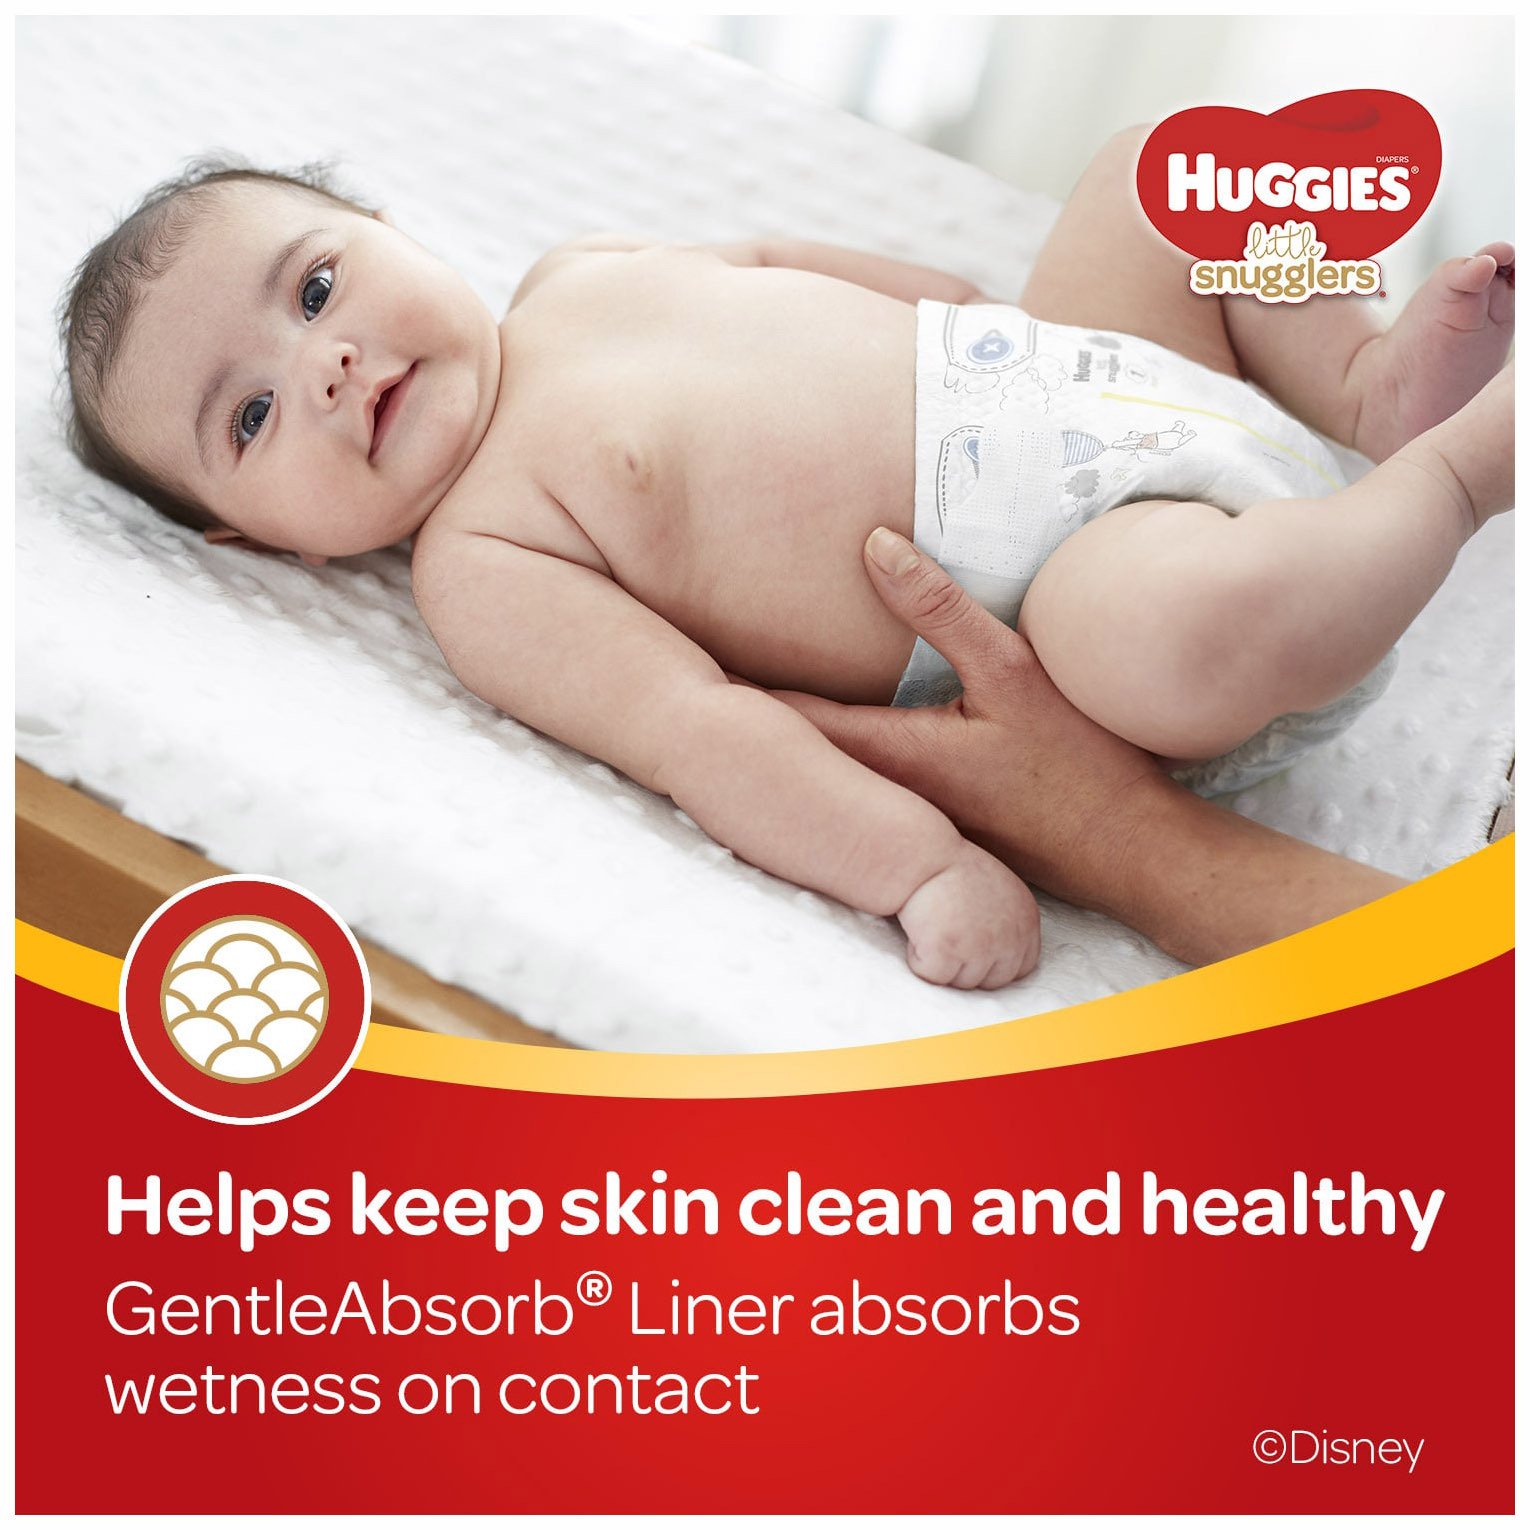 Huggies Newborn Gift Box - Little Snugglers Diapers (Size Newborn, 24 Ct & Size 1, 32 Ct), Natural Care Wipes (96 Ct) & Johnson's Baby Shampoo & Lotion - image 8 of 13